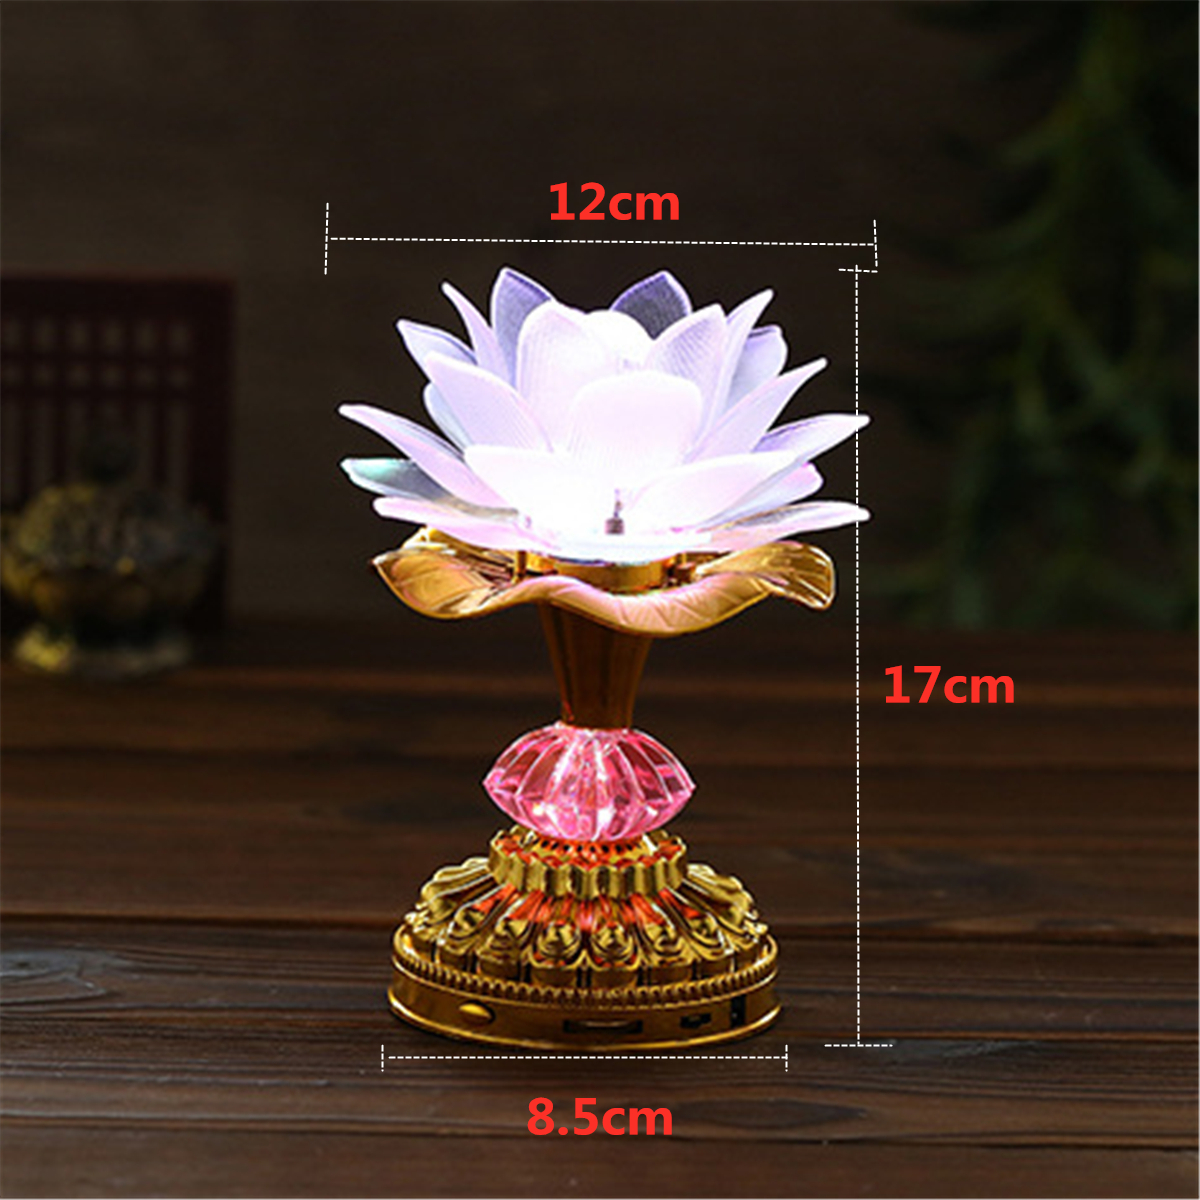 53-Buddhism-Song-7-Color-Changing-Lotus-LED-Night-Light-Music-Holiday-Lamp-Decoration-1683172-10